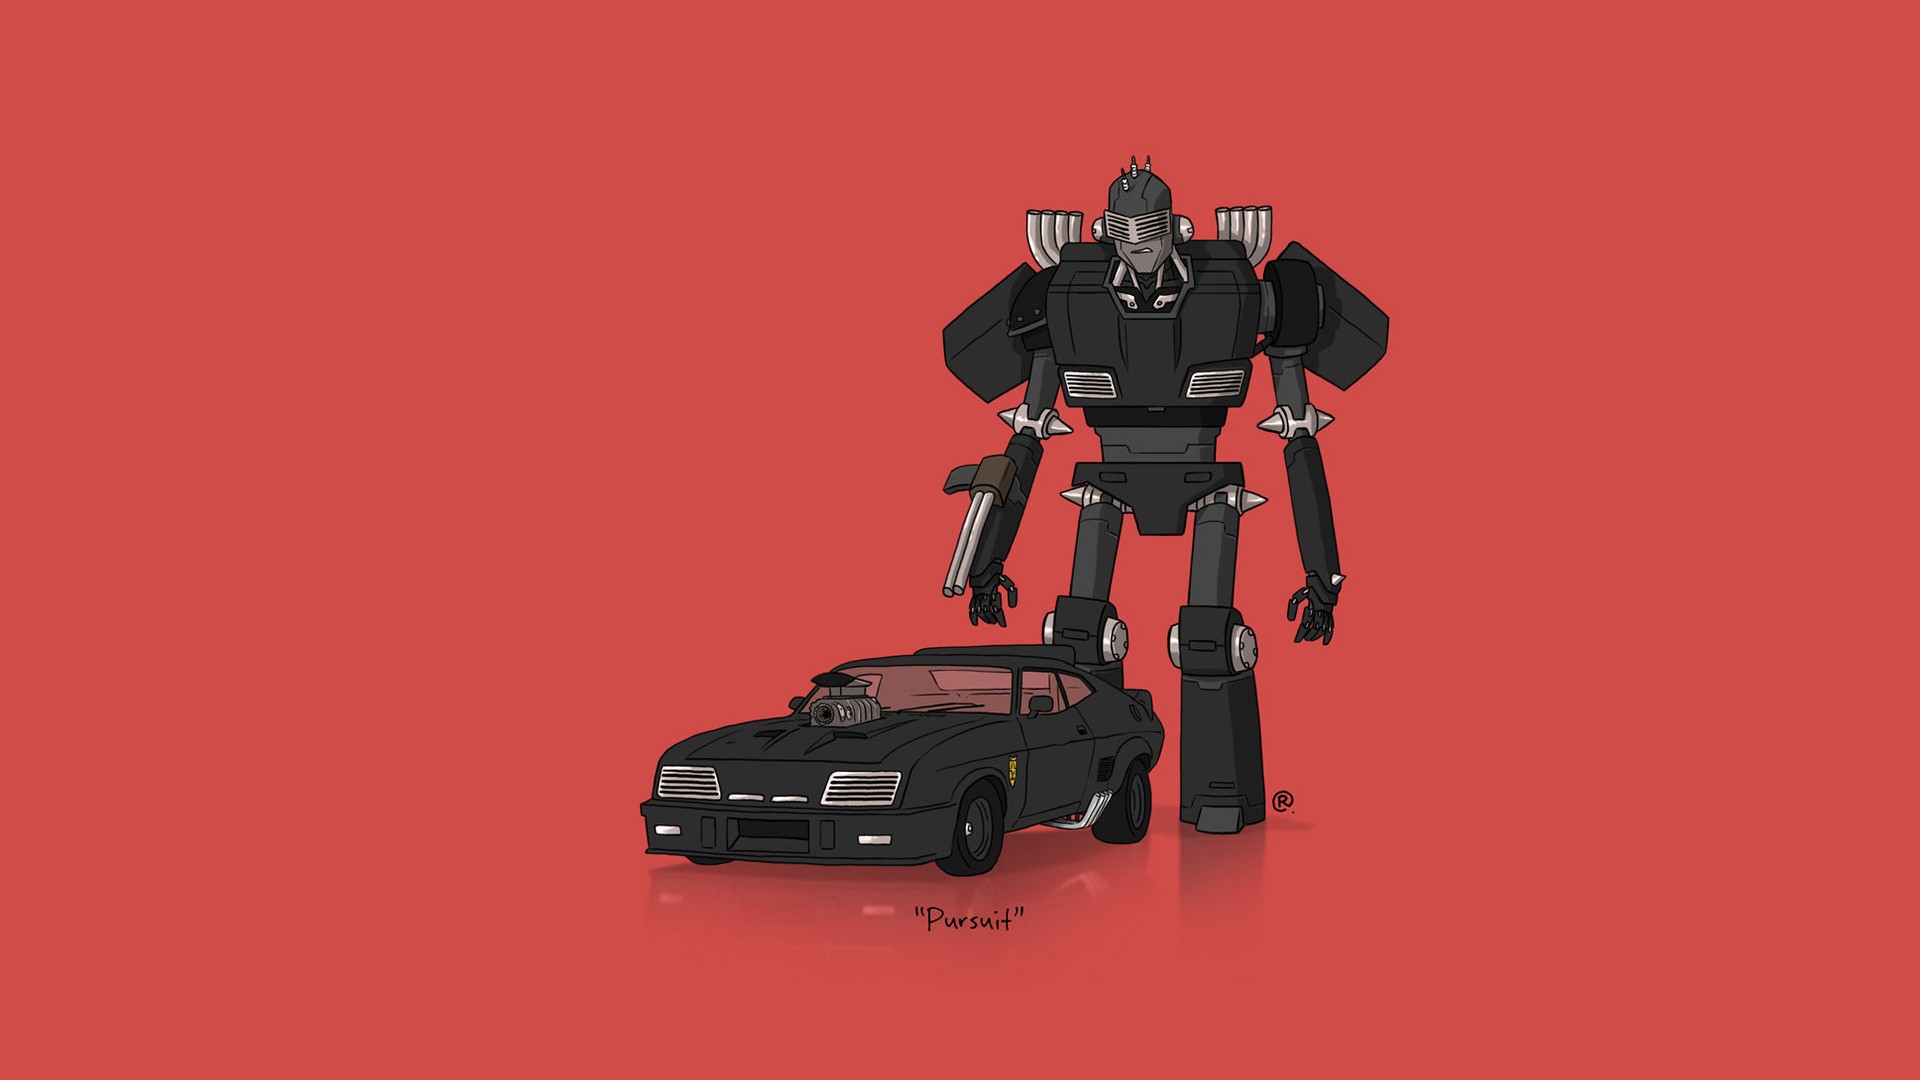 General 1920x1080 car Transformers minimalism Mad Max robot crossover simple background vehicle red background Hasbro Ford Ford Falcon Australian cars